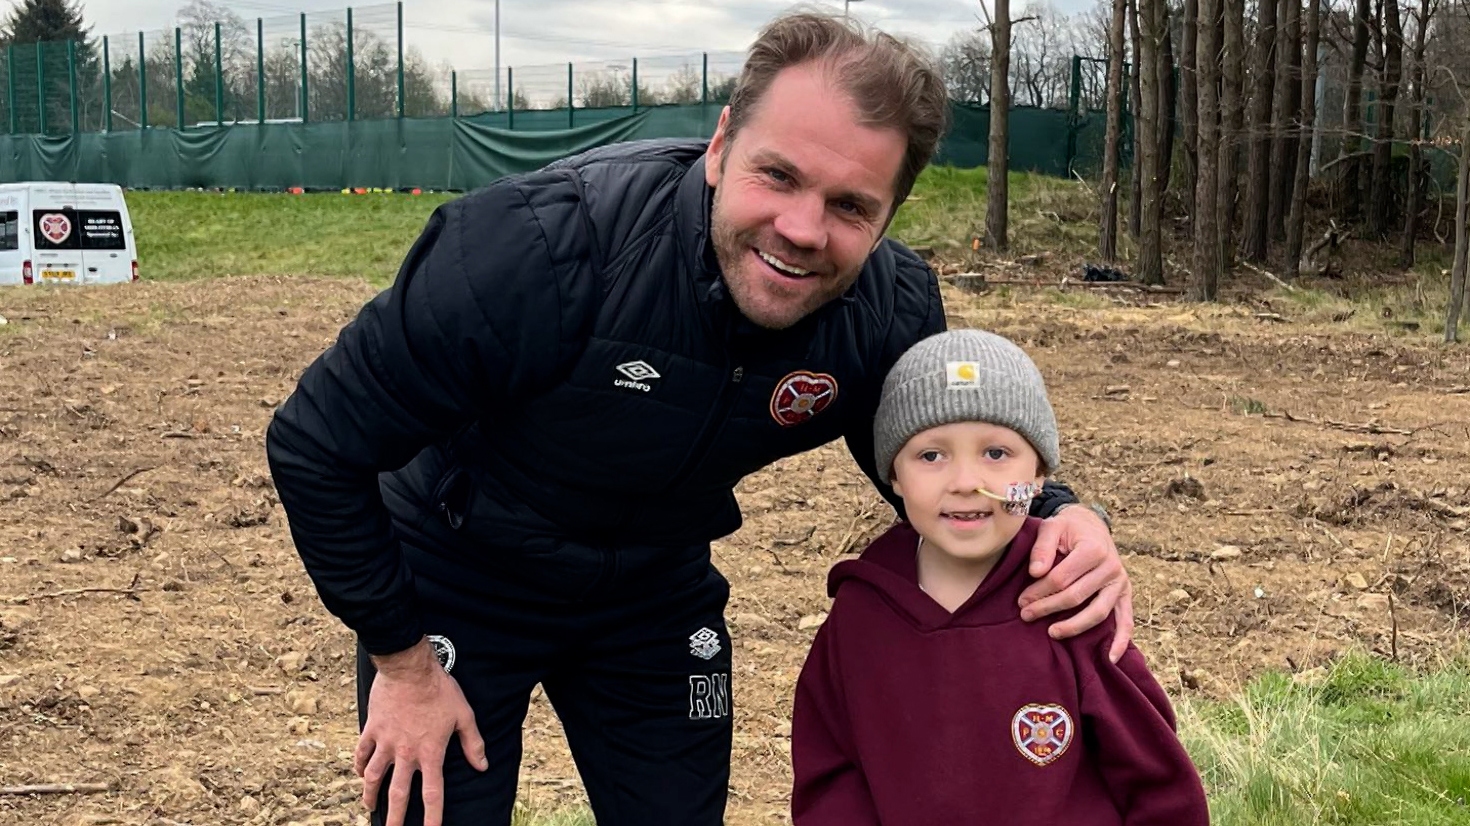 Rudi met Hearts manager Robbie Neilson earlier this year. 